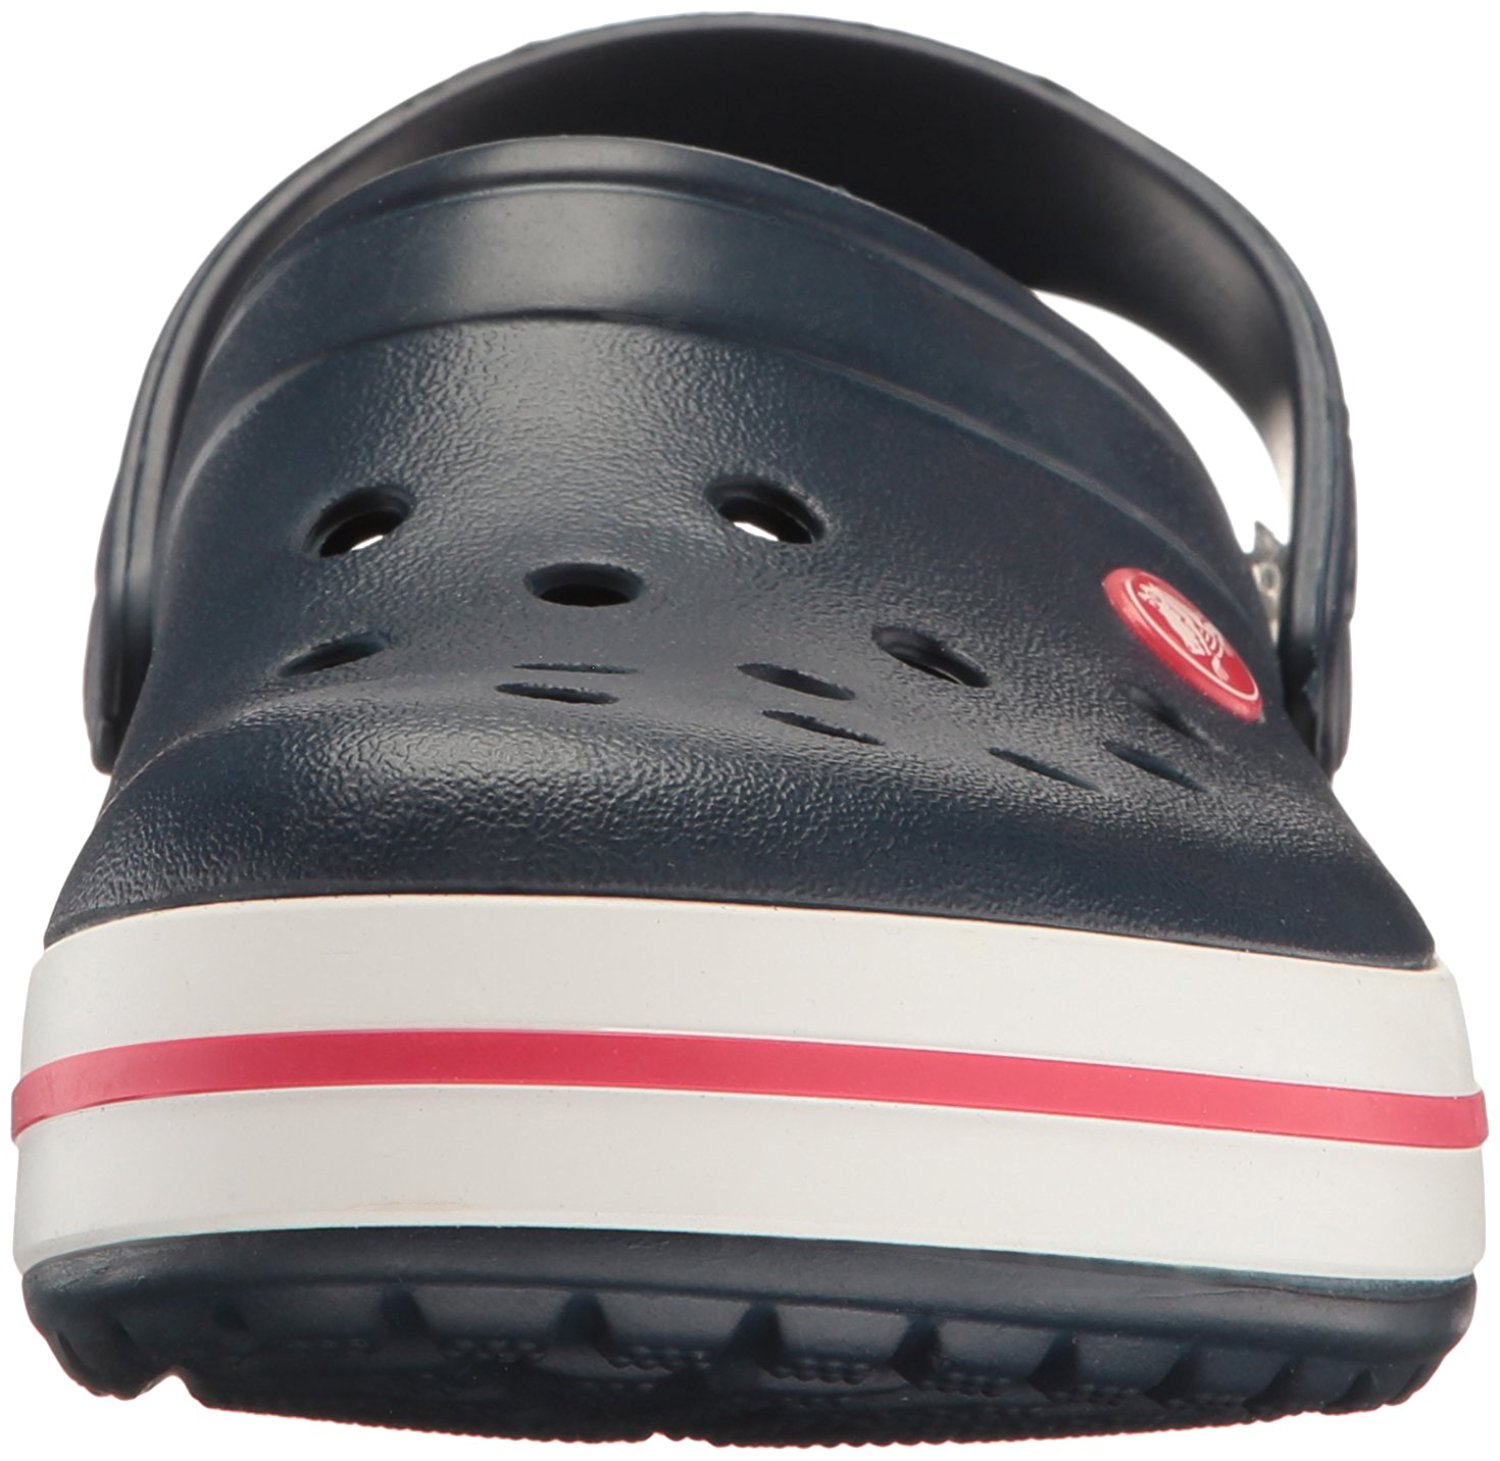 Buy Crocs Unisex Crocband Navy Blue Clogs Online @ ₹2495 from ShopClues